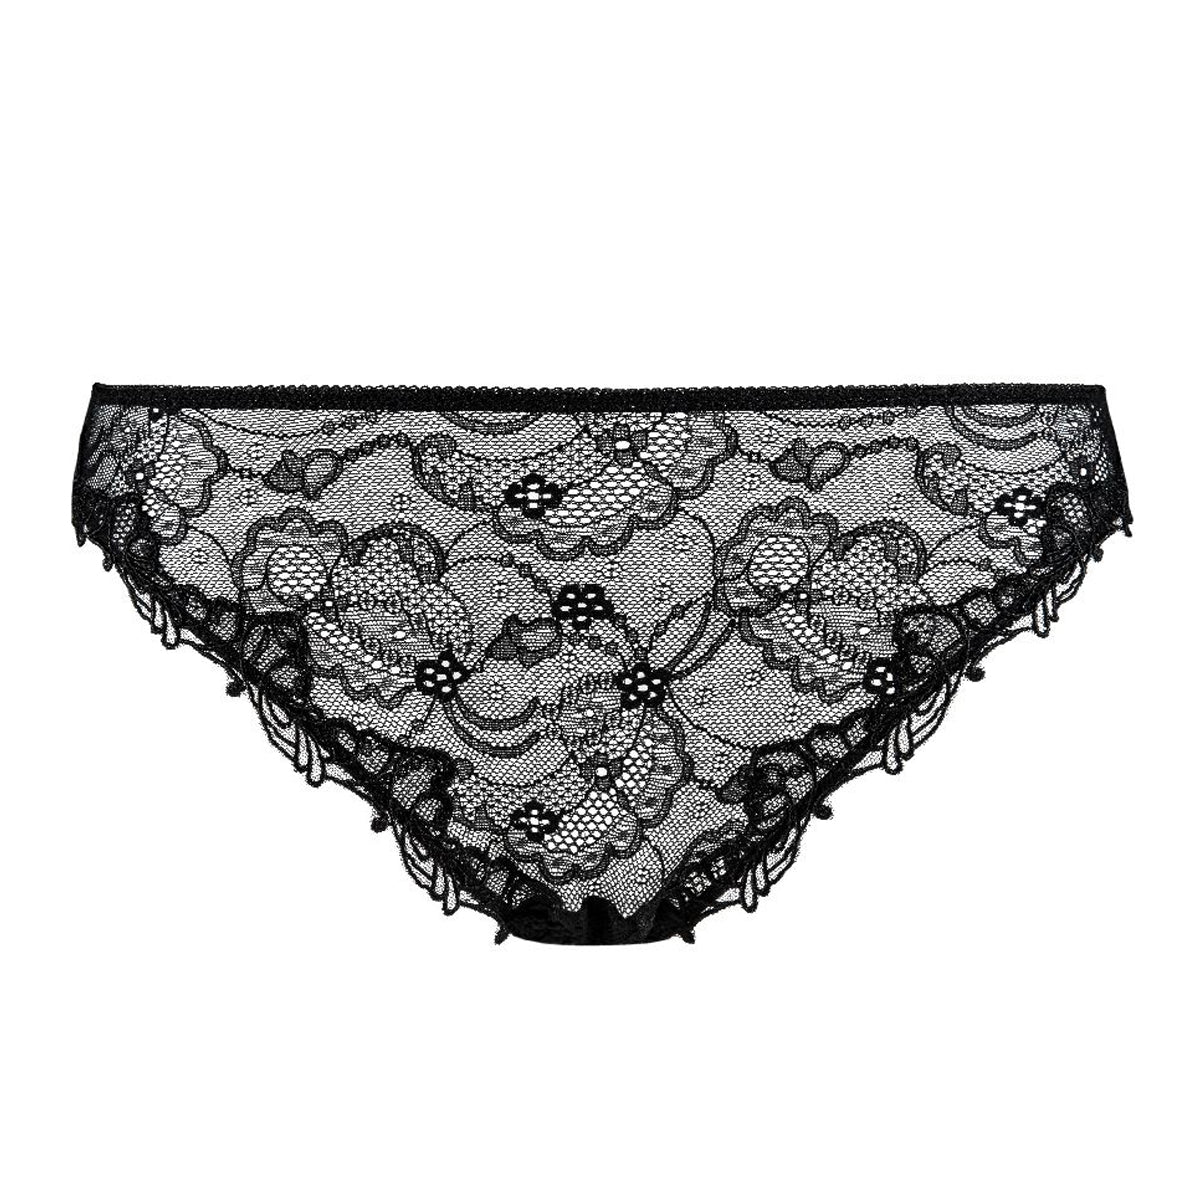 Tanga made with Calais lace by Lise Charmel Collection Soir de Venise red